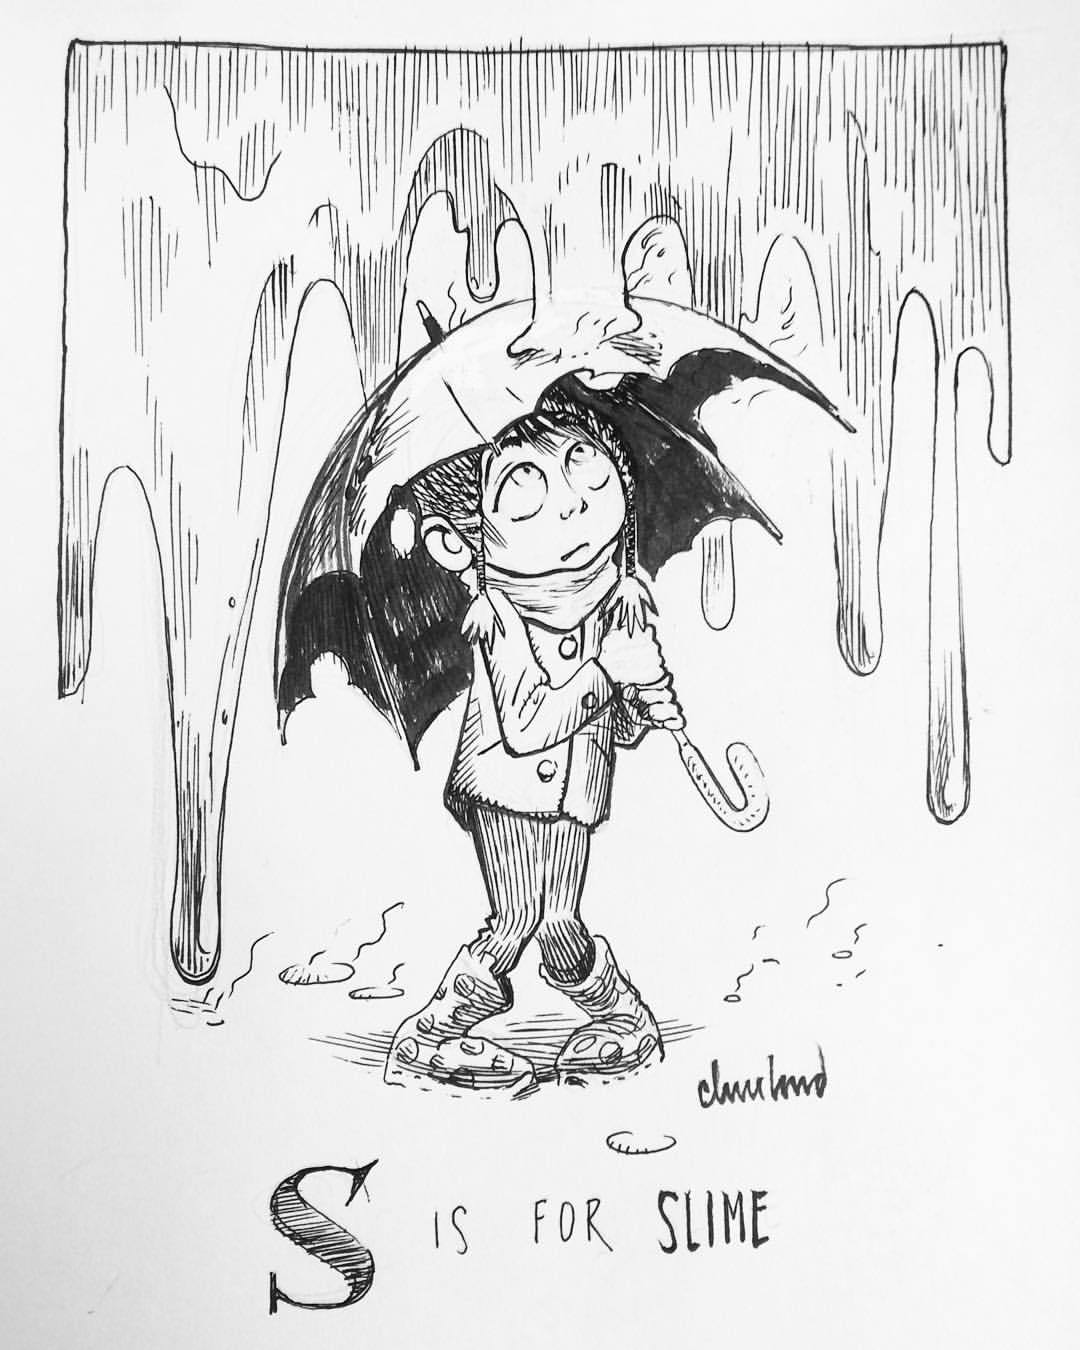 Inktober #20. Better bring an umbrella today, could be yucky out there. 